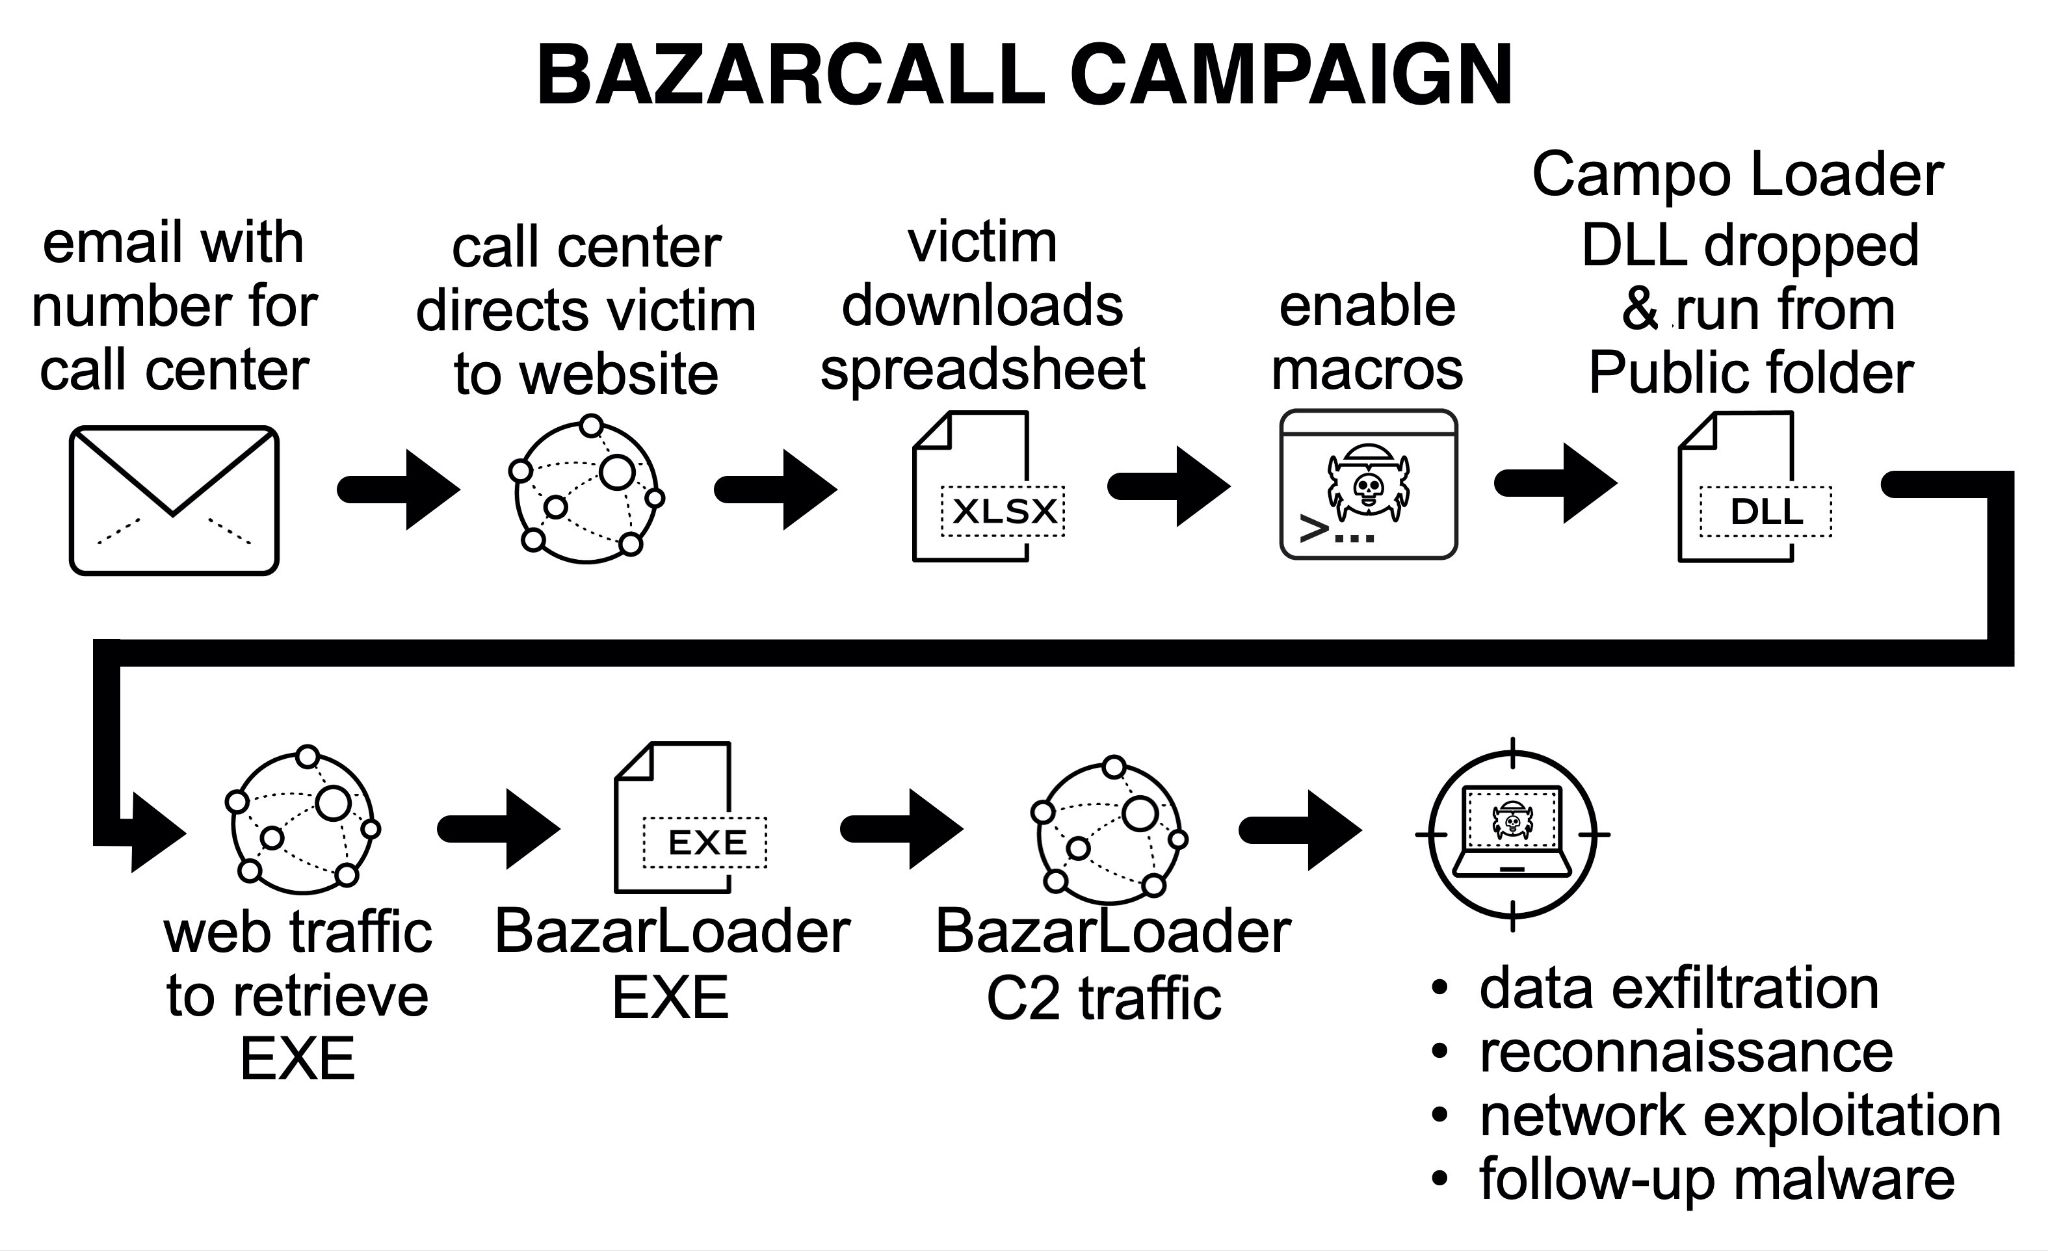 BazarCall flow chart campaign shows victims led through steps that infect their system with BazarLoader malware.